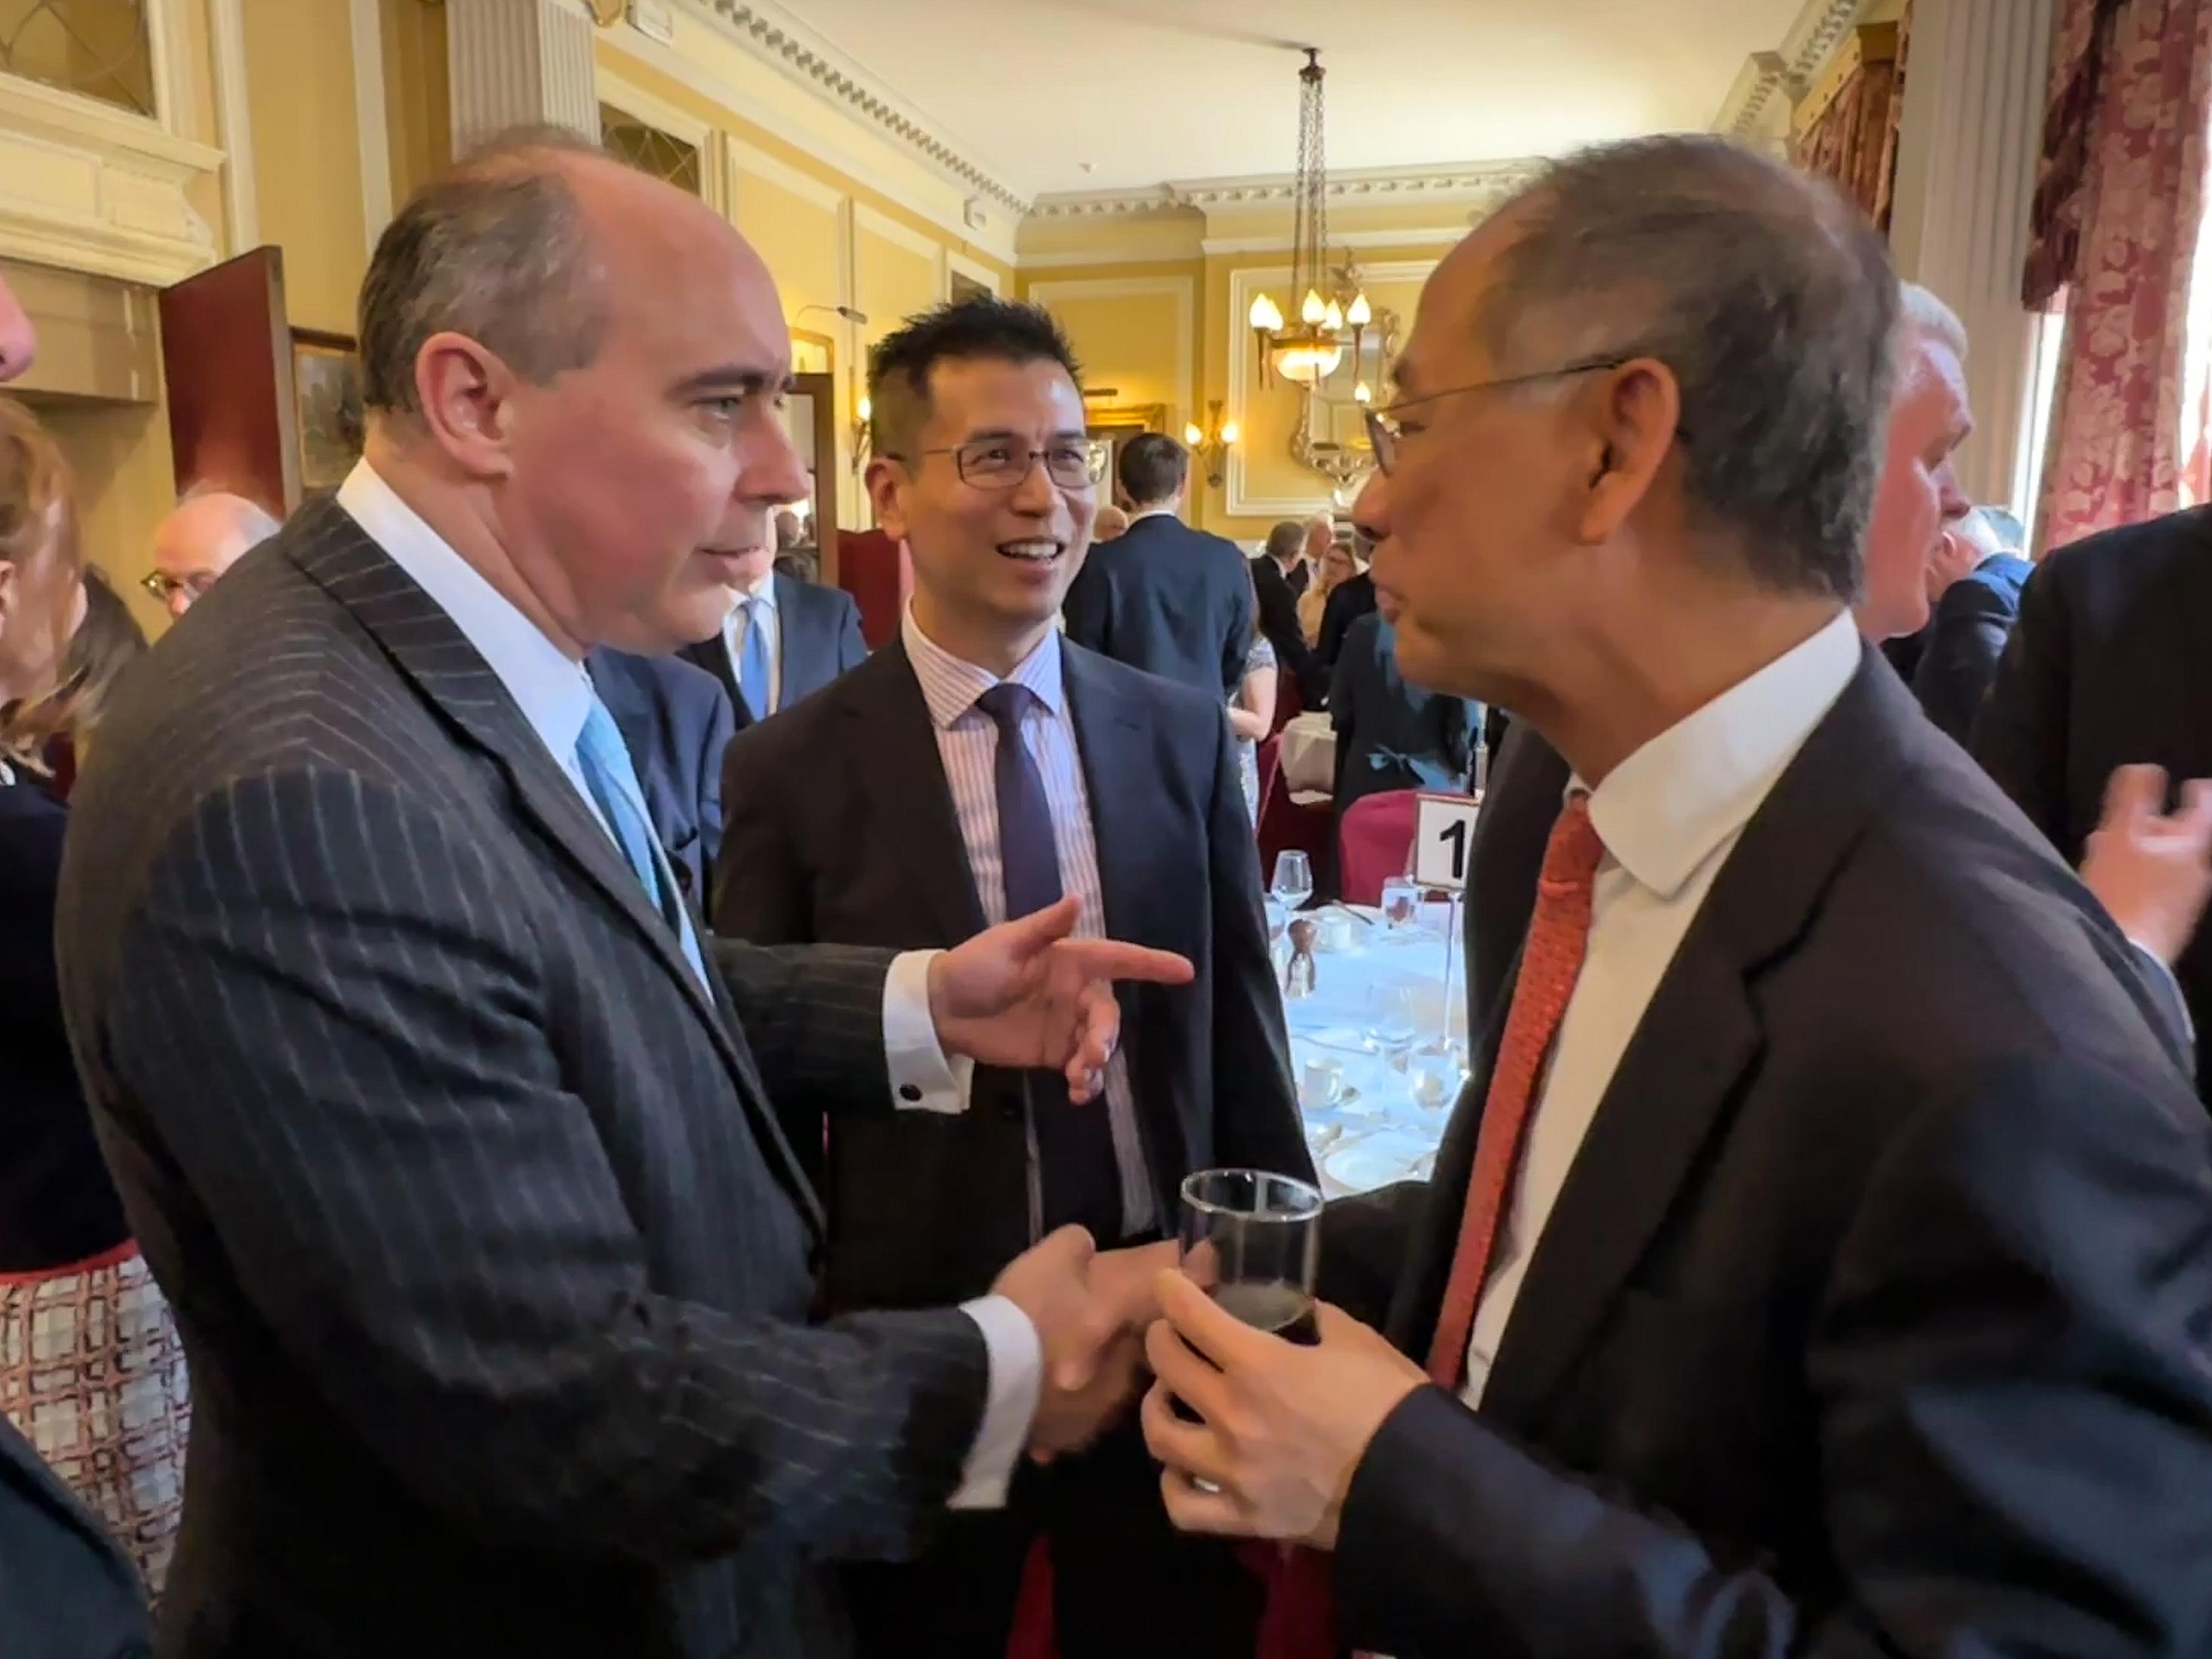 The Hong Kong Economic and Trade Office, London (London ETO), supported the Hong Kong Association to hold a luncheon on May 10 (London time) to promote Hong Kong's position as a forward-looking international financial centre. Photo shows the Chief Executive of HKMA, Mr Eddie Yue (right), and the Director-General of the London ETO, Mr Gilford Law (centre), exchanging views with the Minister of State in the Department for Business and Trade, Lord Dominic Johnson (left), at the luncheon.